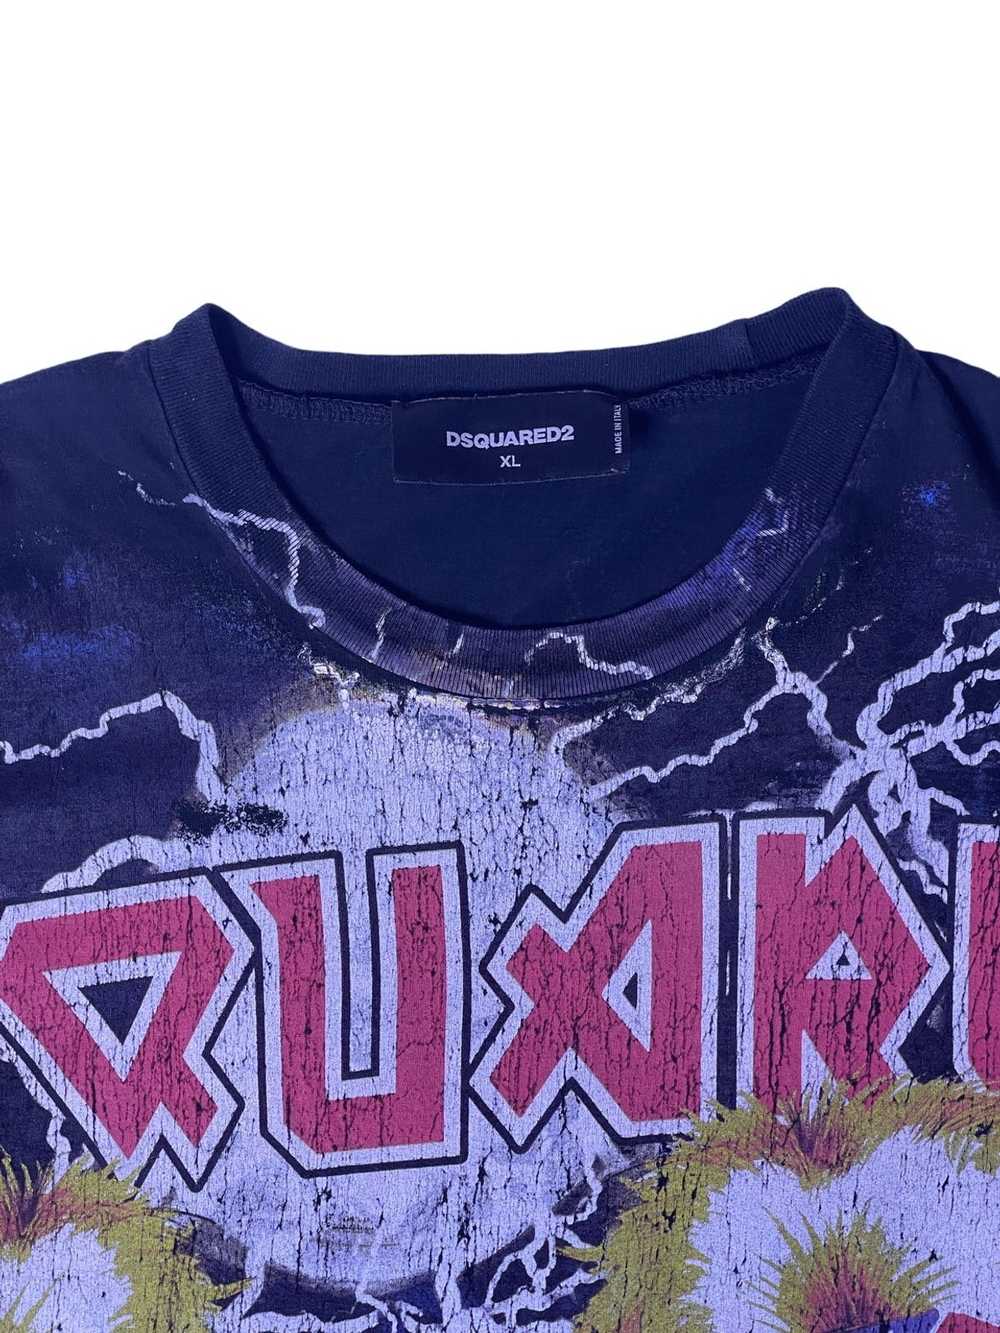 Dsquared2 Dsquared2 sisters from hell rock T shirt - image 8